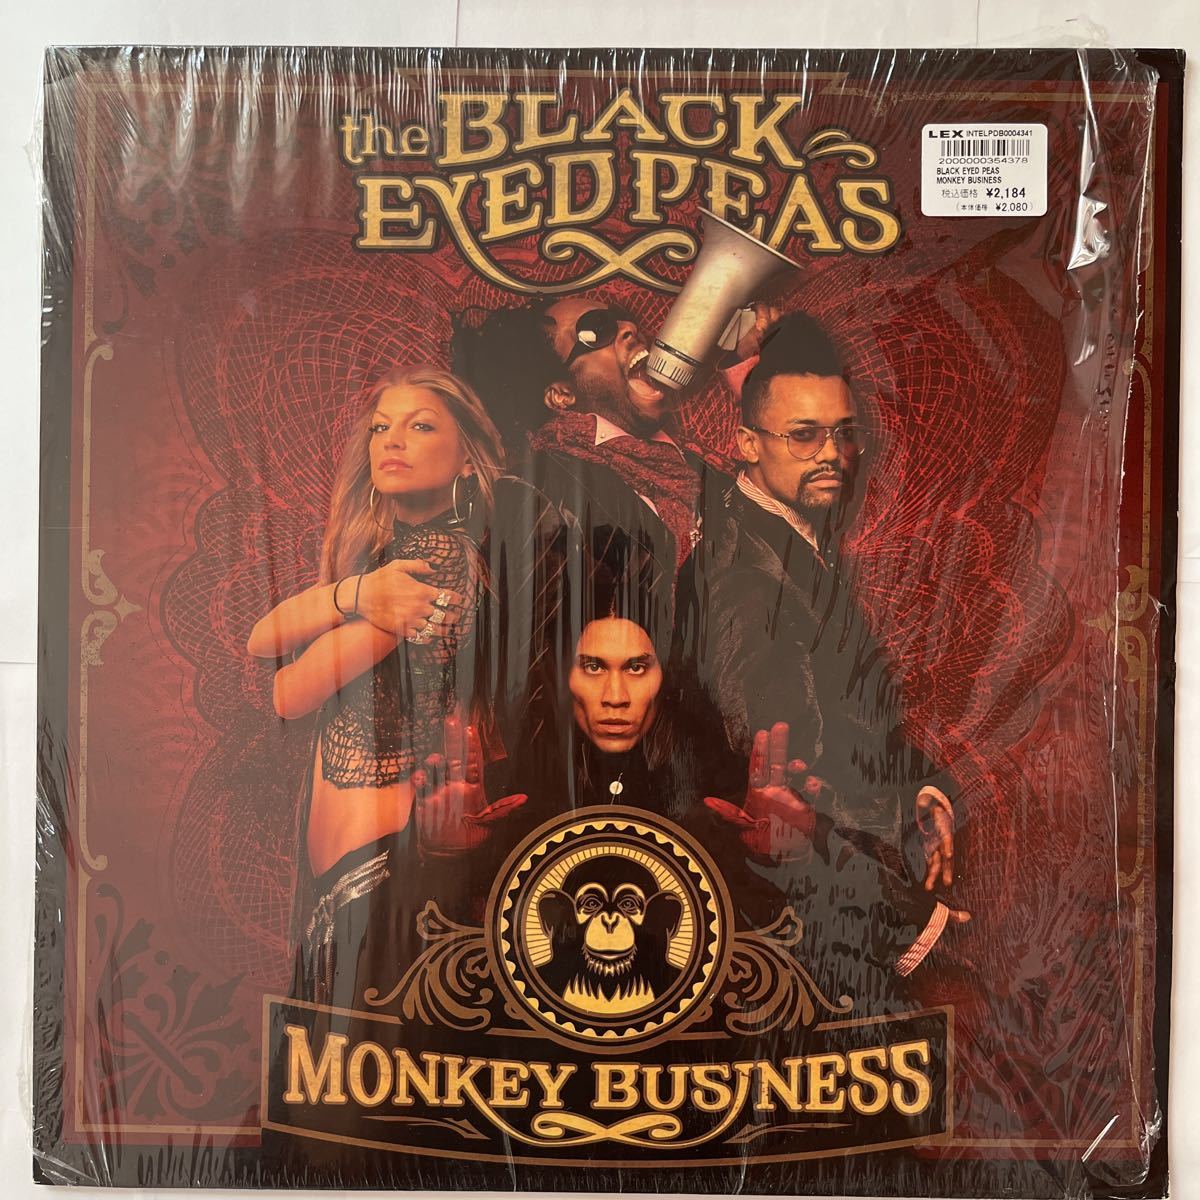 The Black Eyed Peas Monkey Business / (2LP) / A&M Records B0004341-01 / 中古品　アルバム